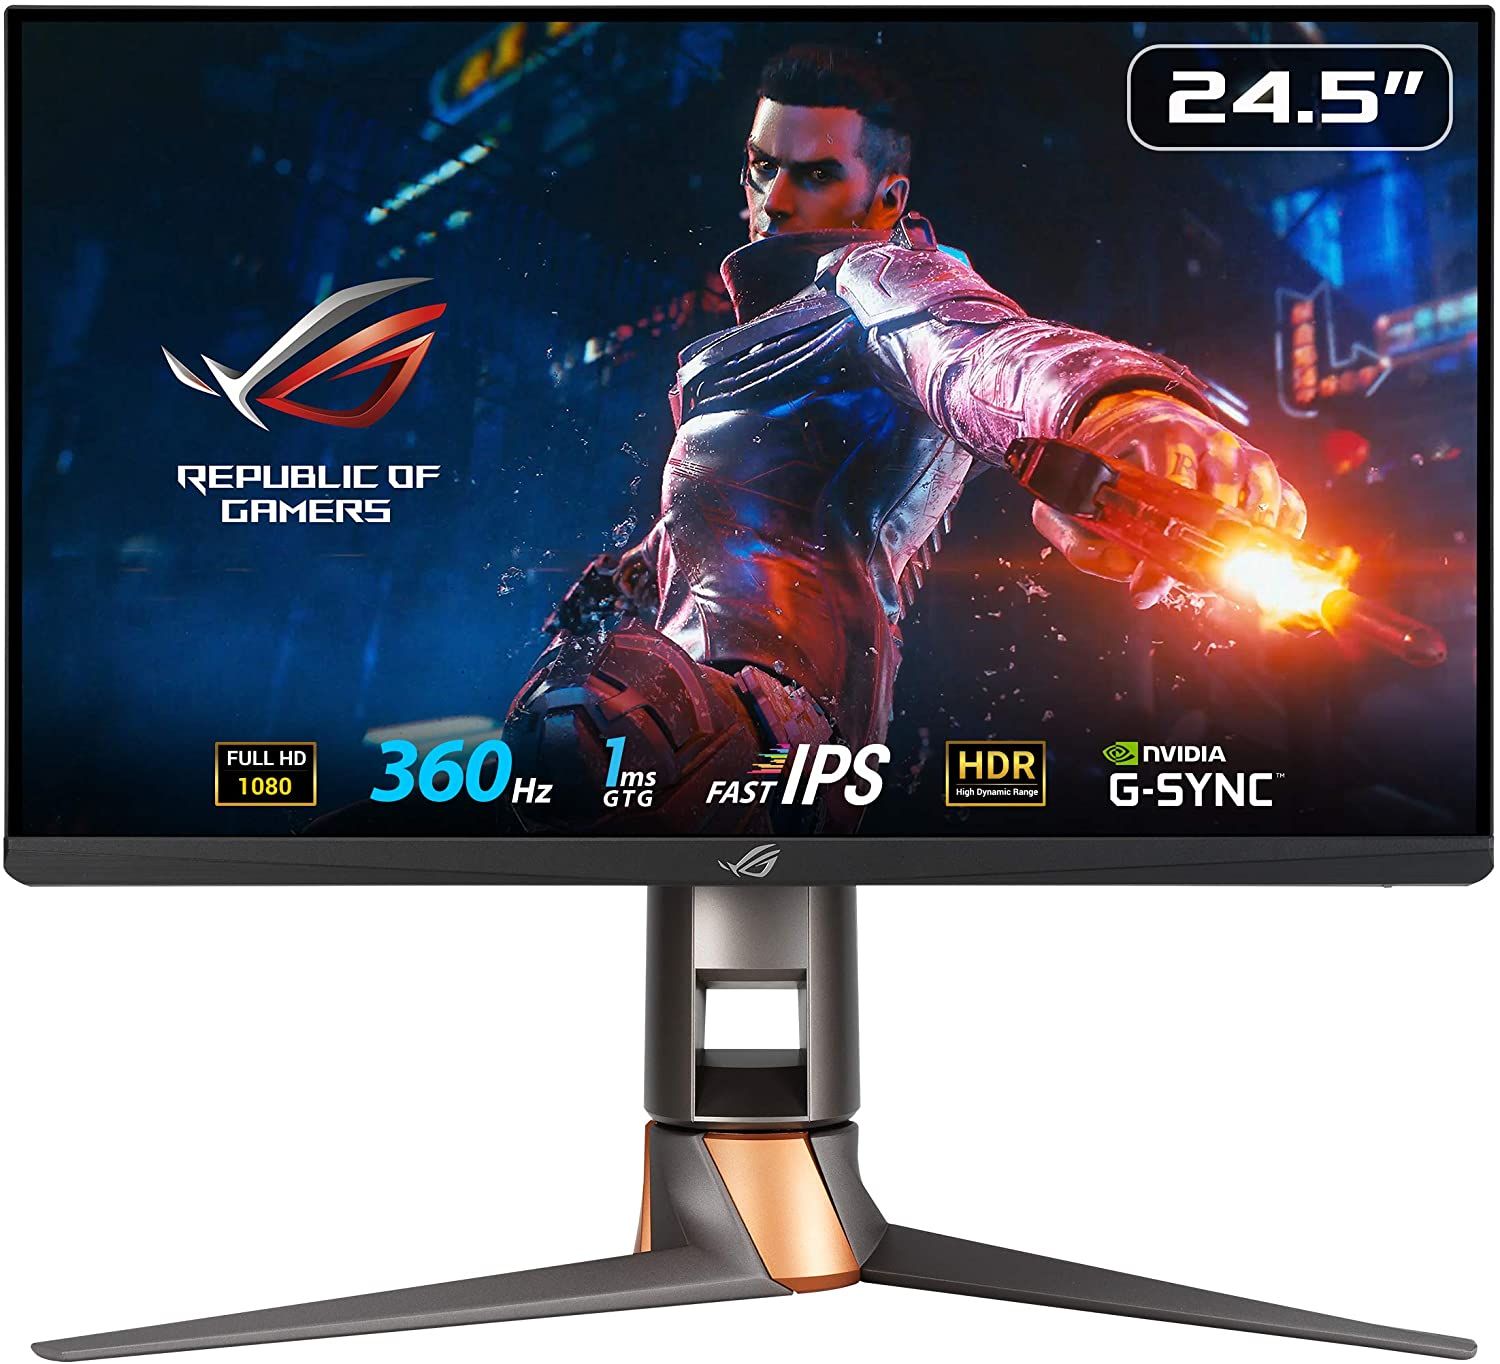 ASUS ROG Swift PG259QN product image of a grey monitor with gold trim and a video game character in armour on the display.